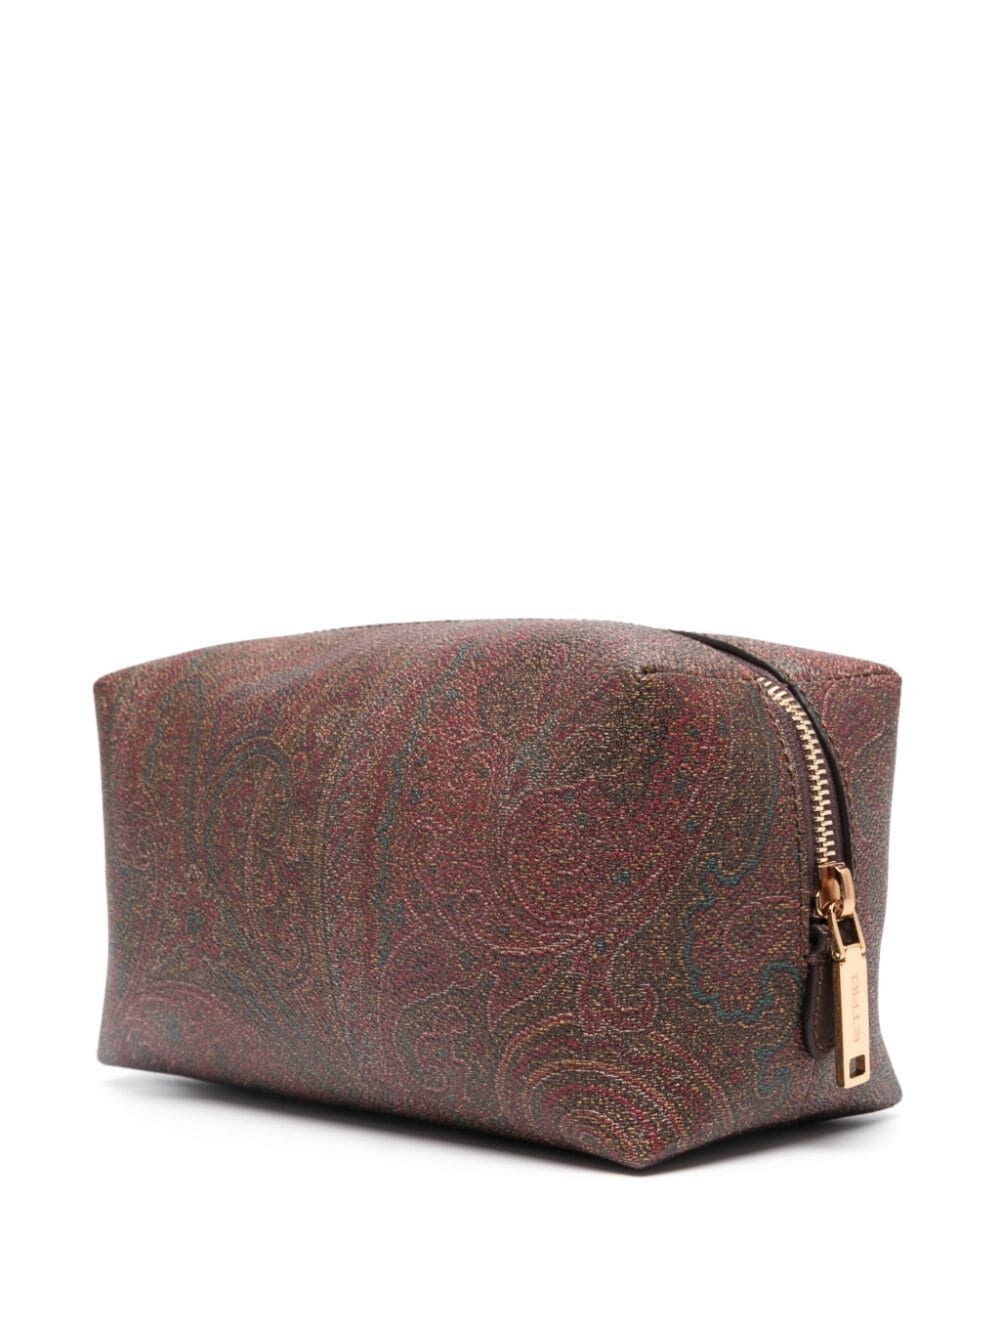 Paisley pouch - 2